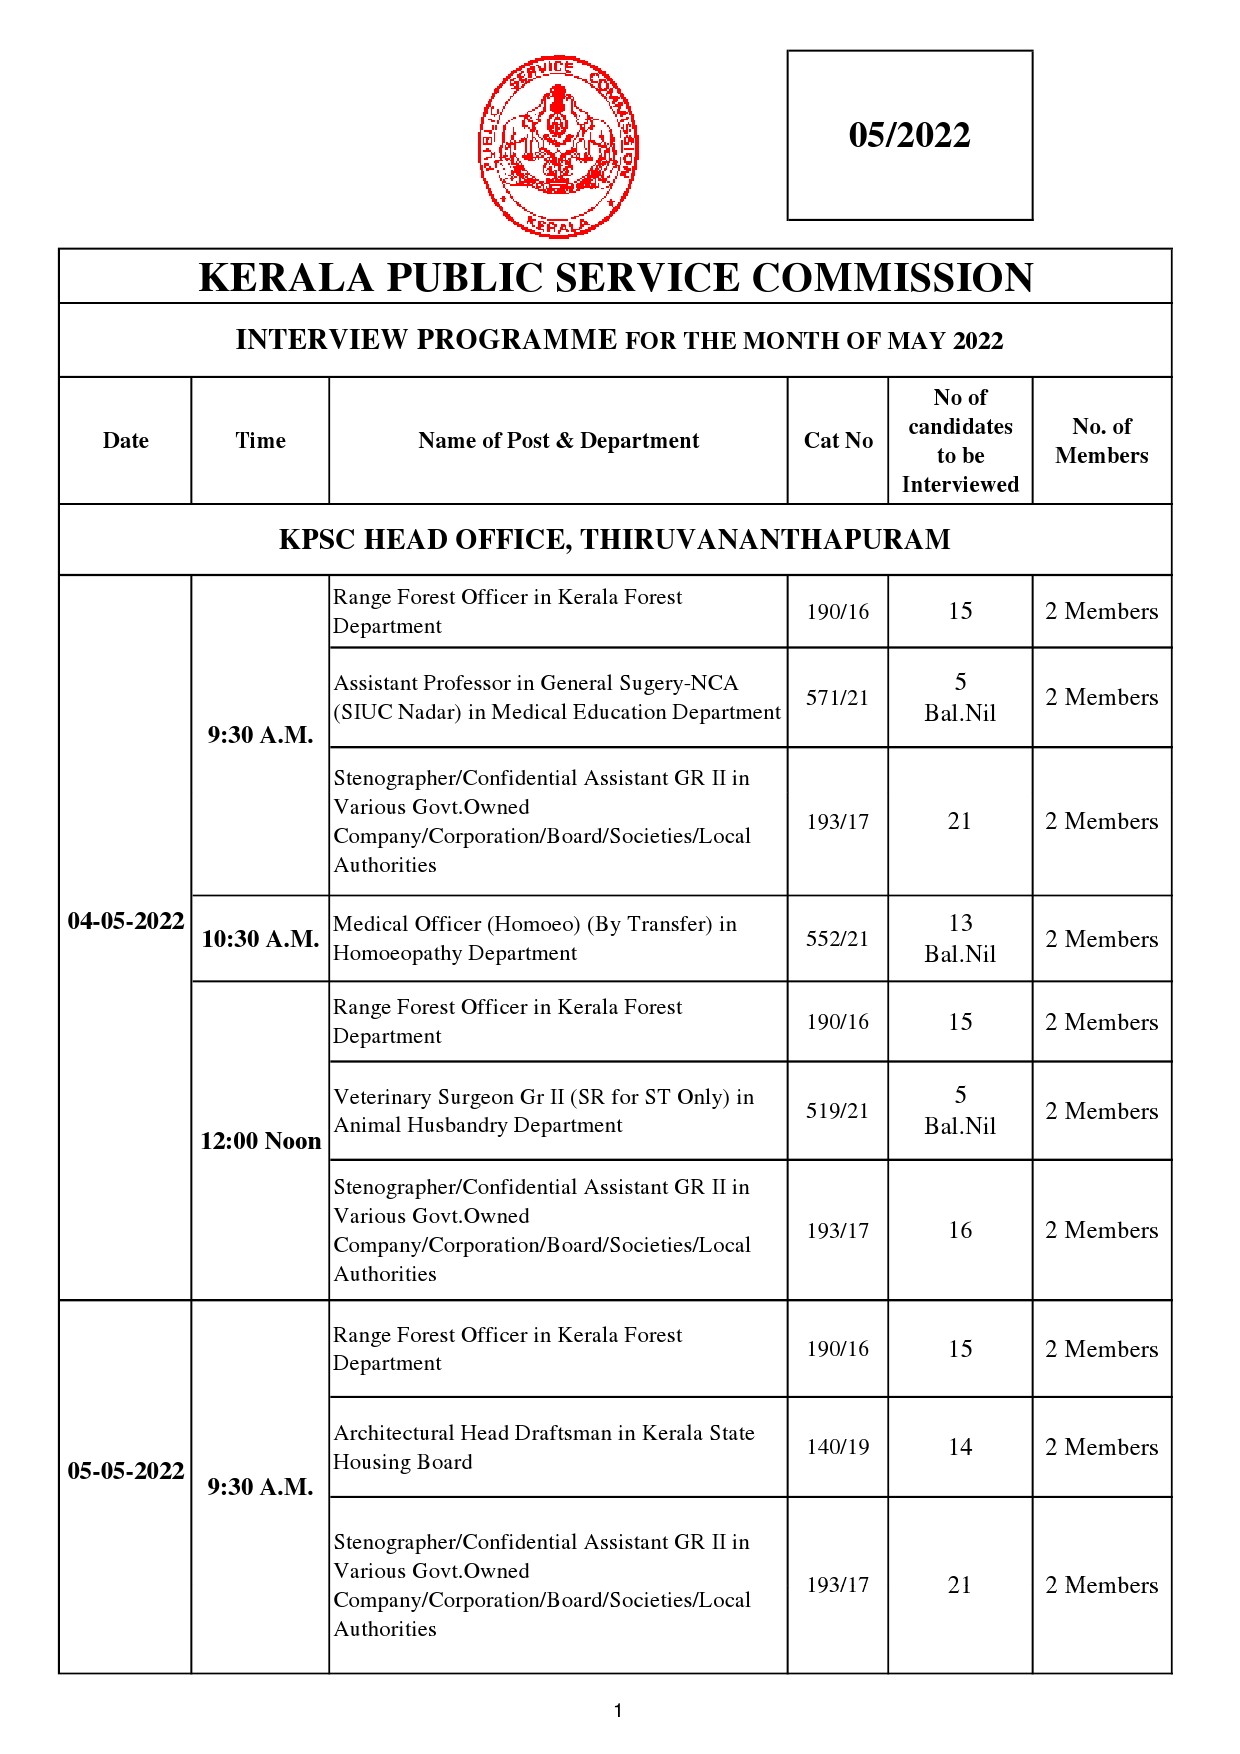 KPSC INTERVIEW PROGRAMME FOR THE MONTH OF MAY 2022 - Notification Image 1